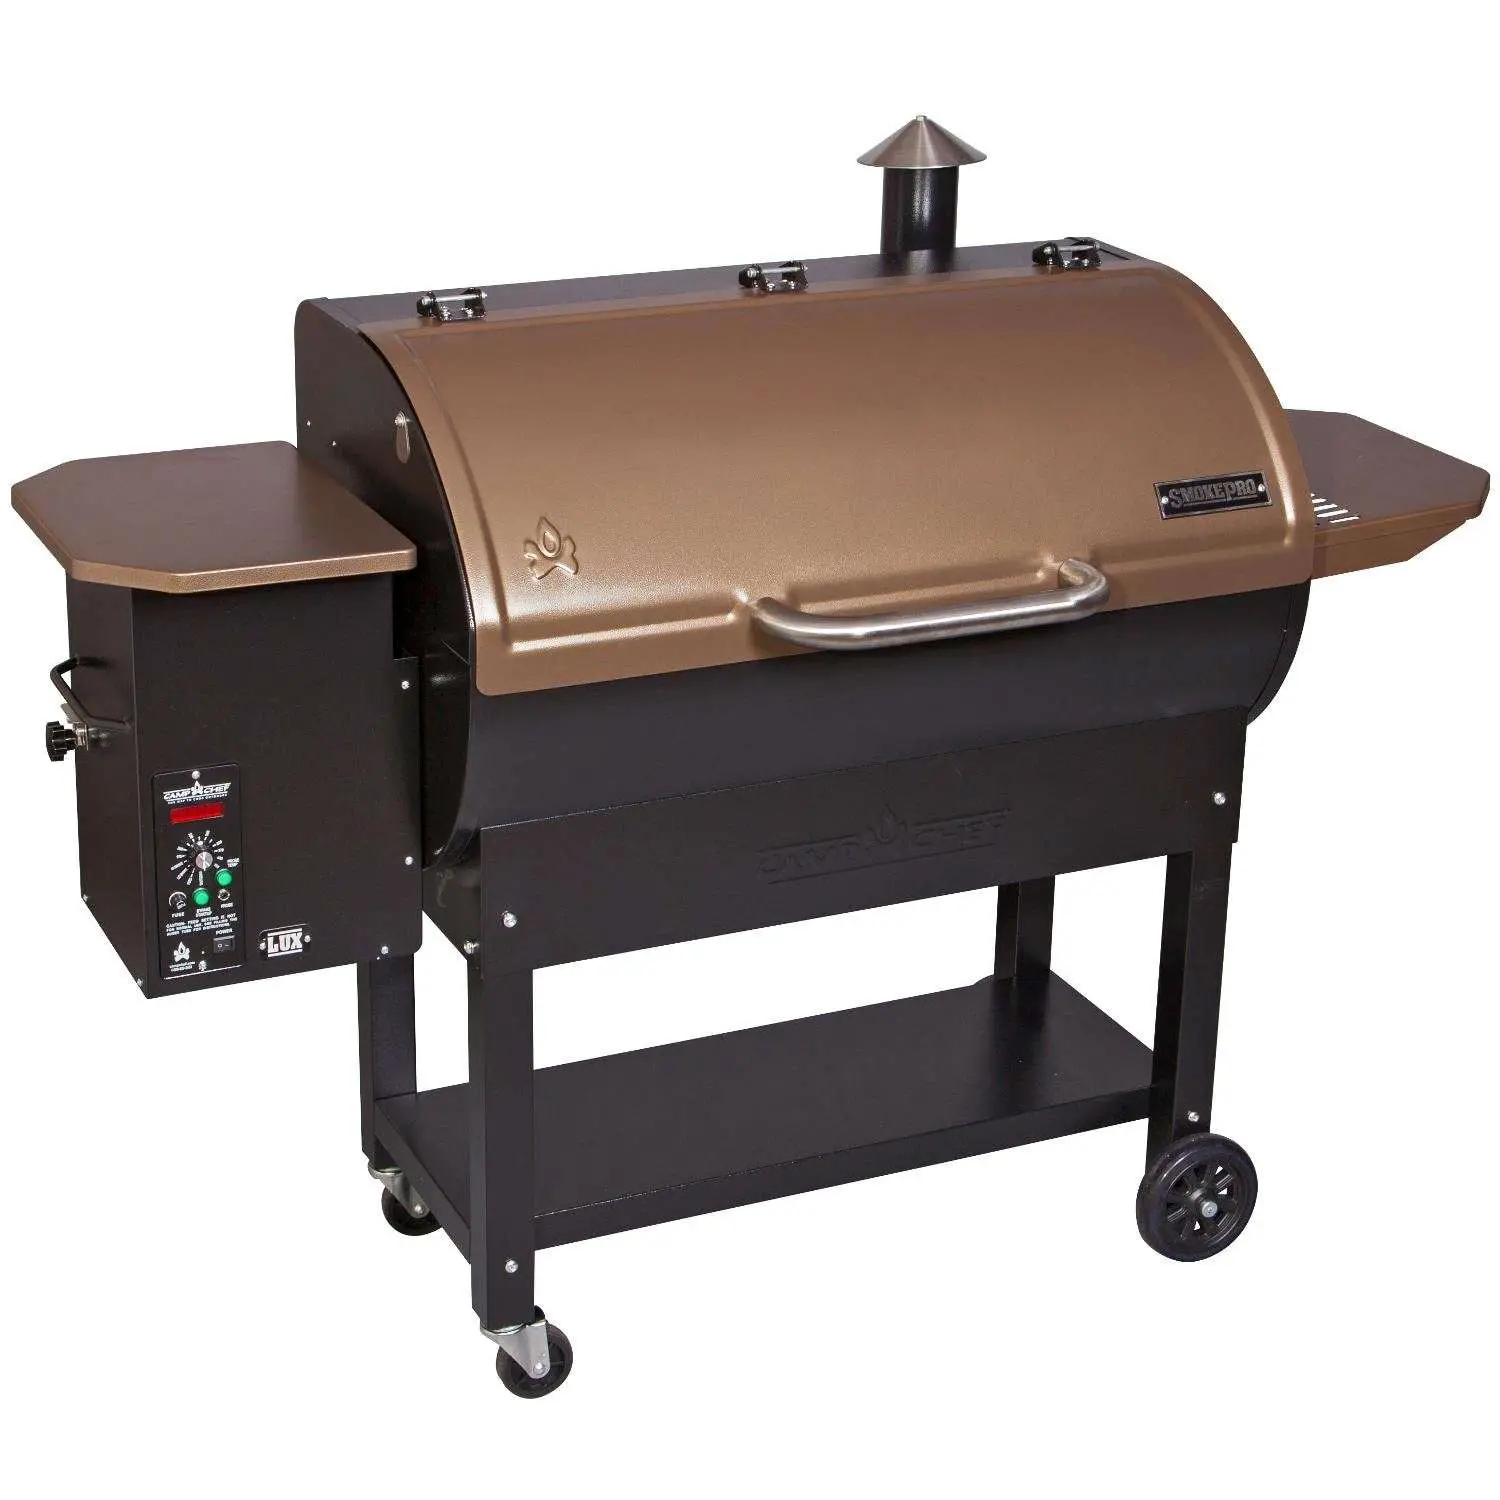 Camp Chef SmokePro LUX Wood Pellet Grill